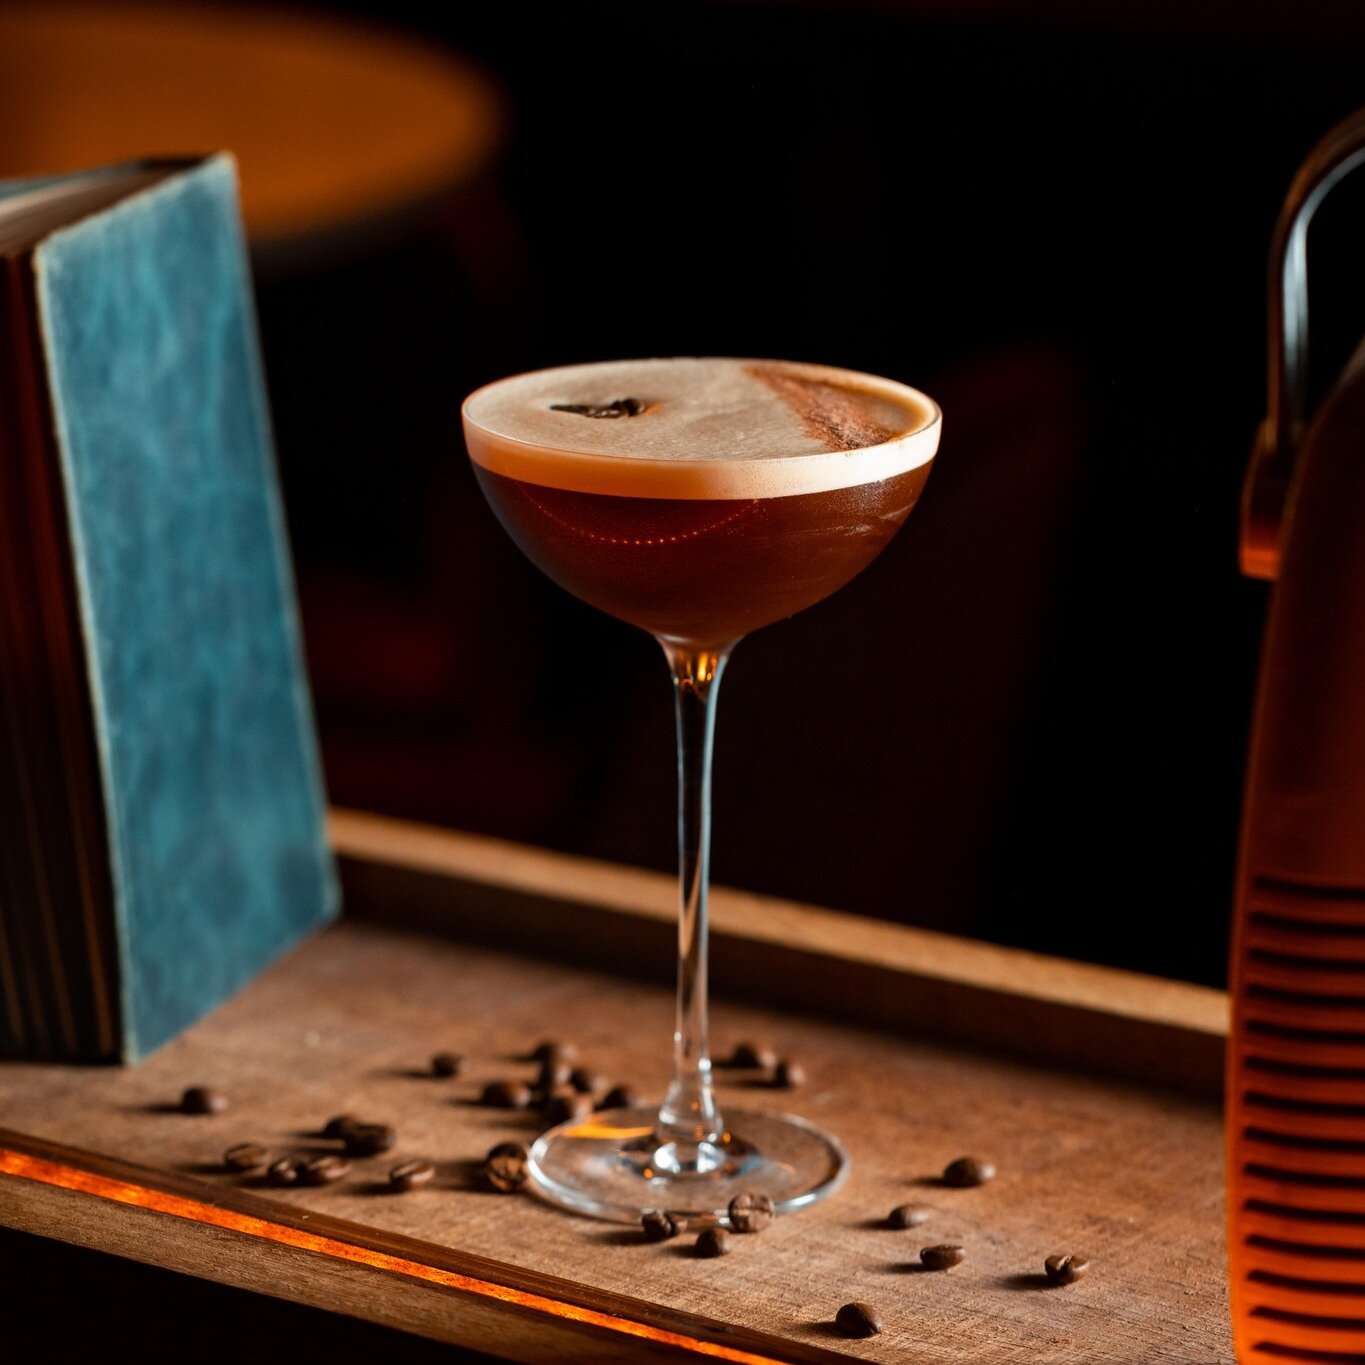 Our Espresso Martini 🍸✨

Name a better cocktail, we'll wait.

Join us for drinks Wed-Sun - walk-ins welcome 👌